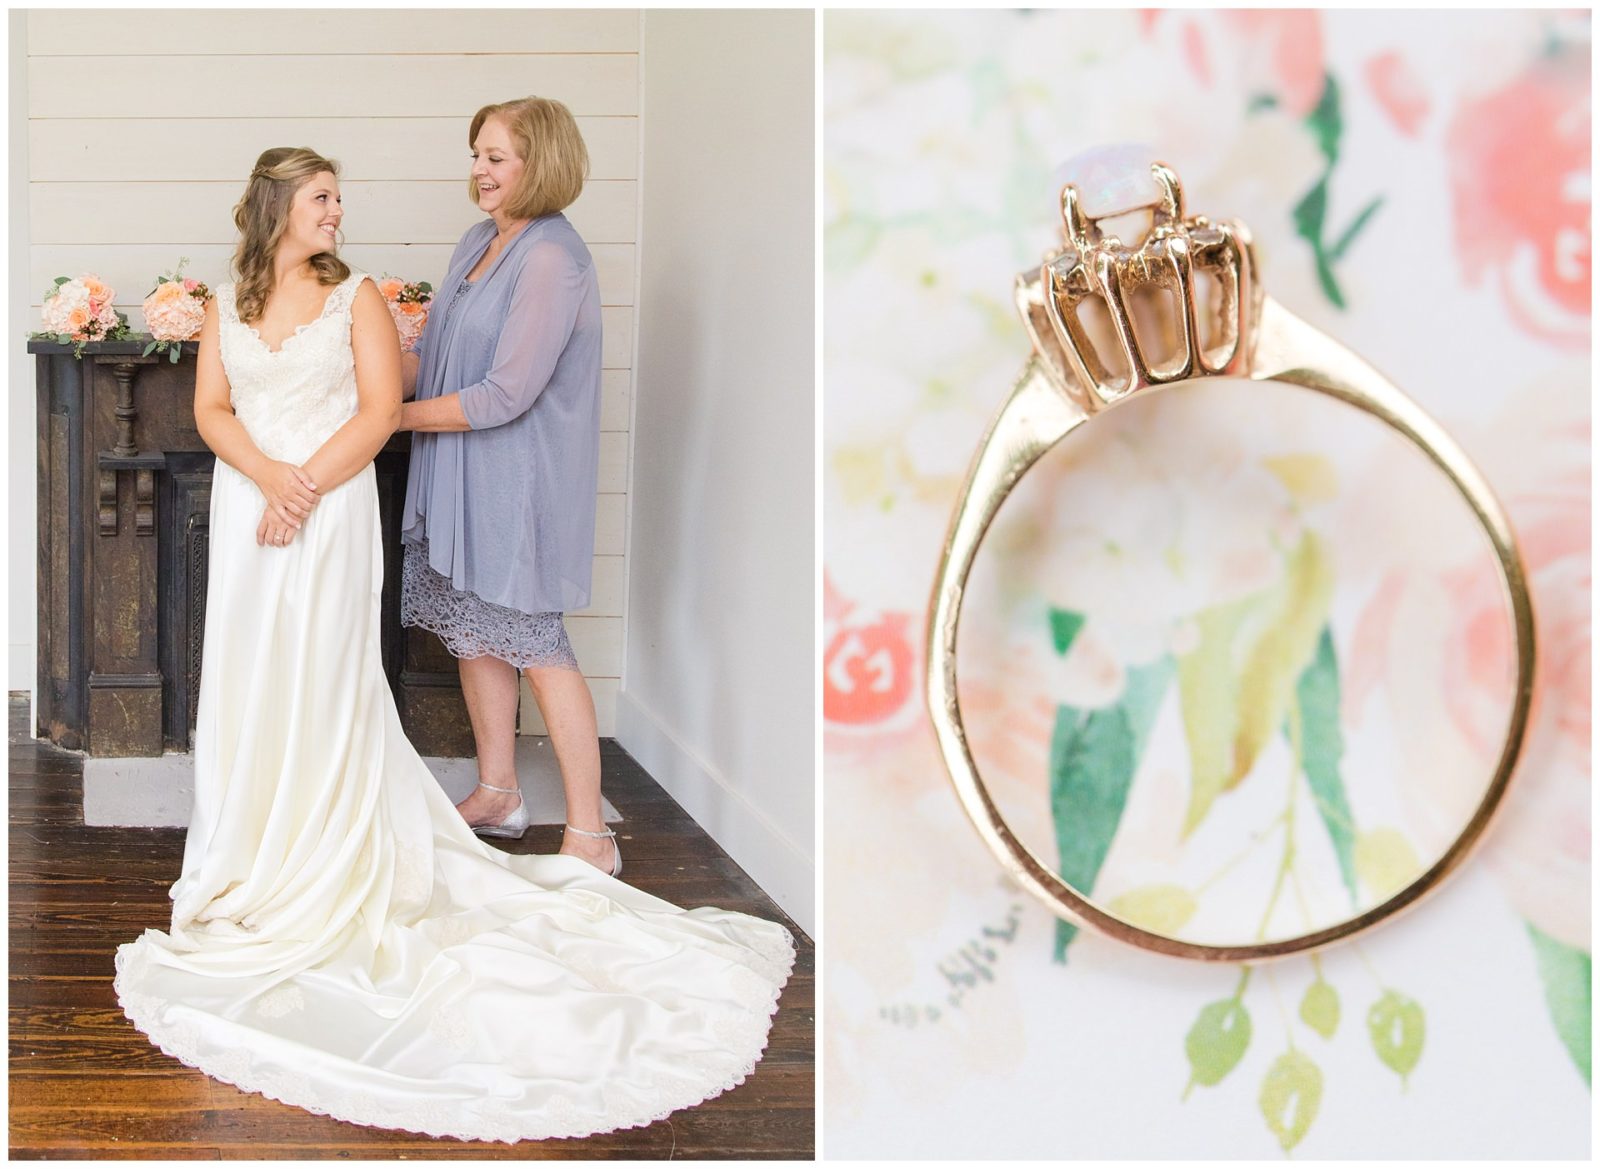 Wedding Bride and mom Photos at the Barn at McCall Springs in Lawrenceburg, Kentucky.